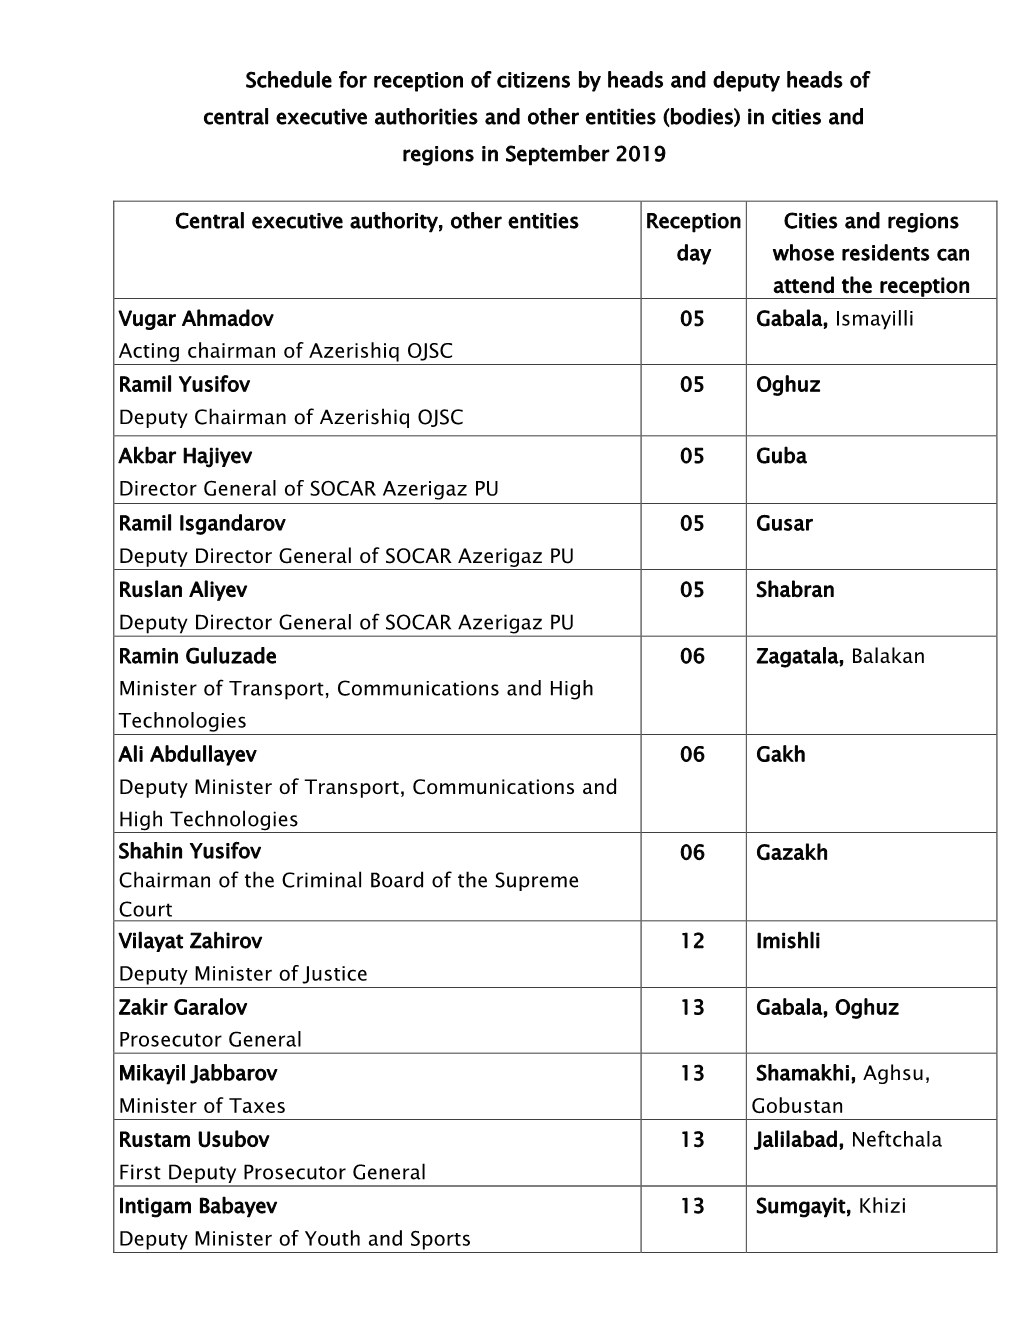 Schedule for Reception of Citizens by Heads and Deputy Heads of Central Executive Authorities and Other Entities (Bodies) in Cities and Regions in September 2019